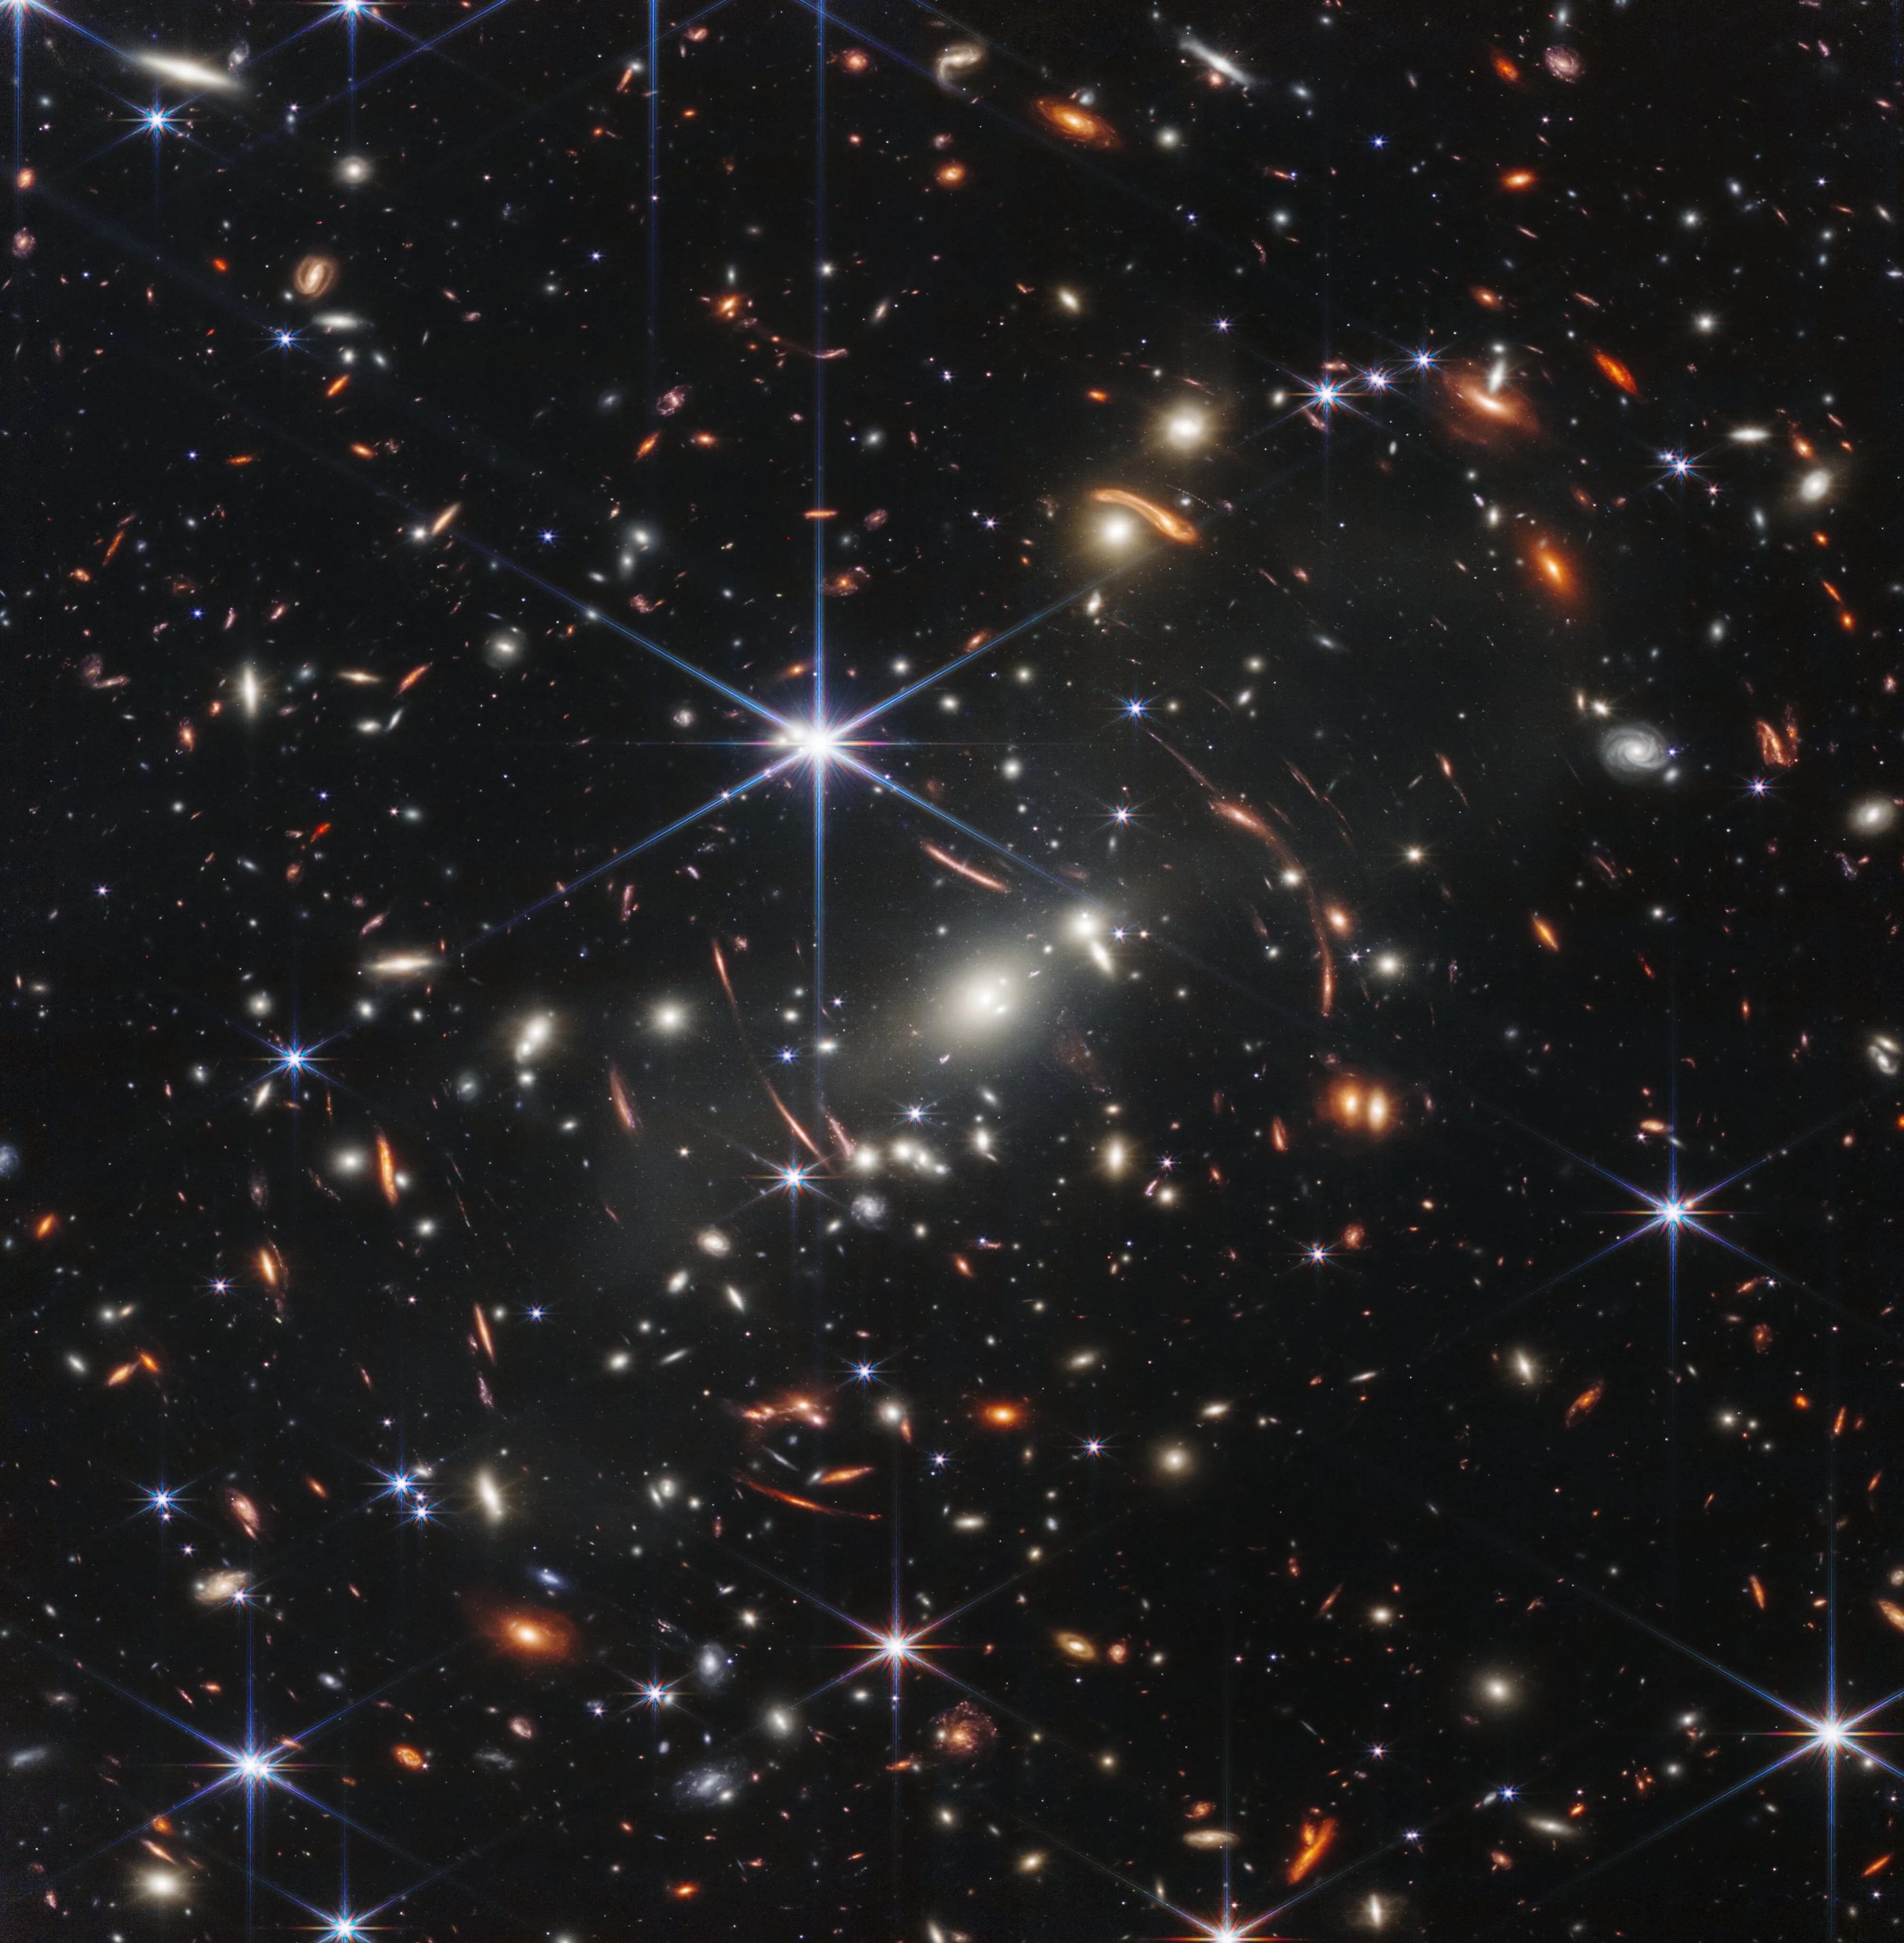 The image shows the galaxy cluster SMACS 0723 as it appeared 4.6 billion years ago